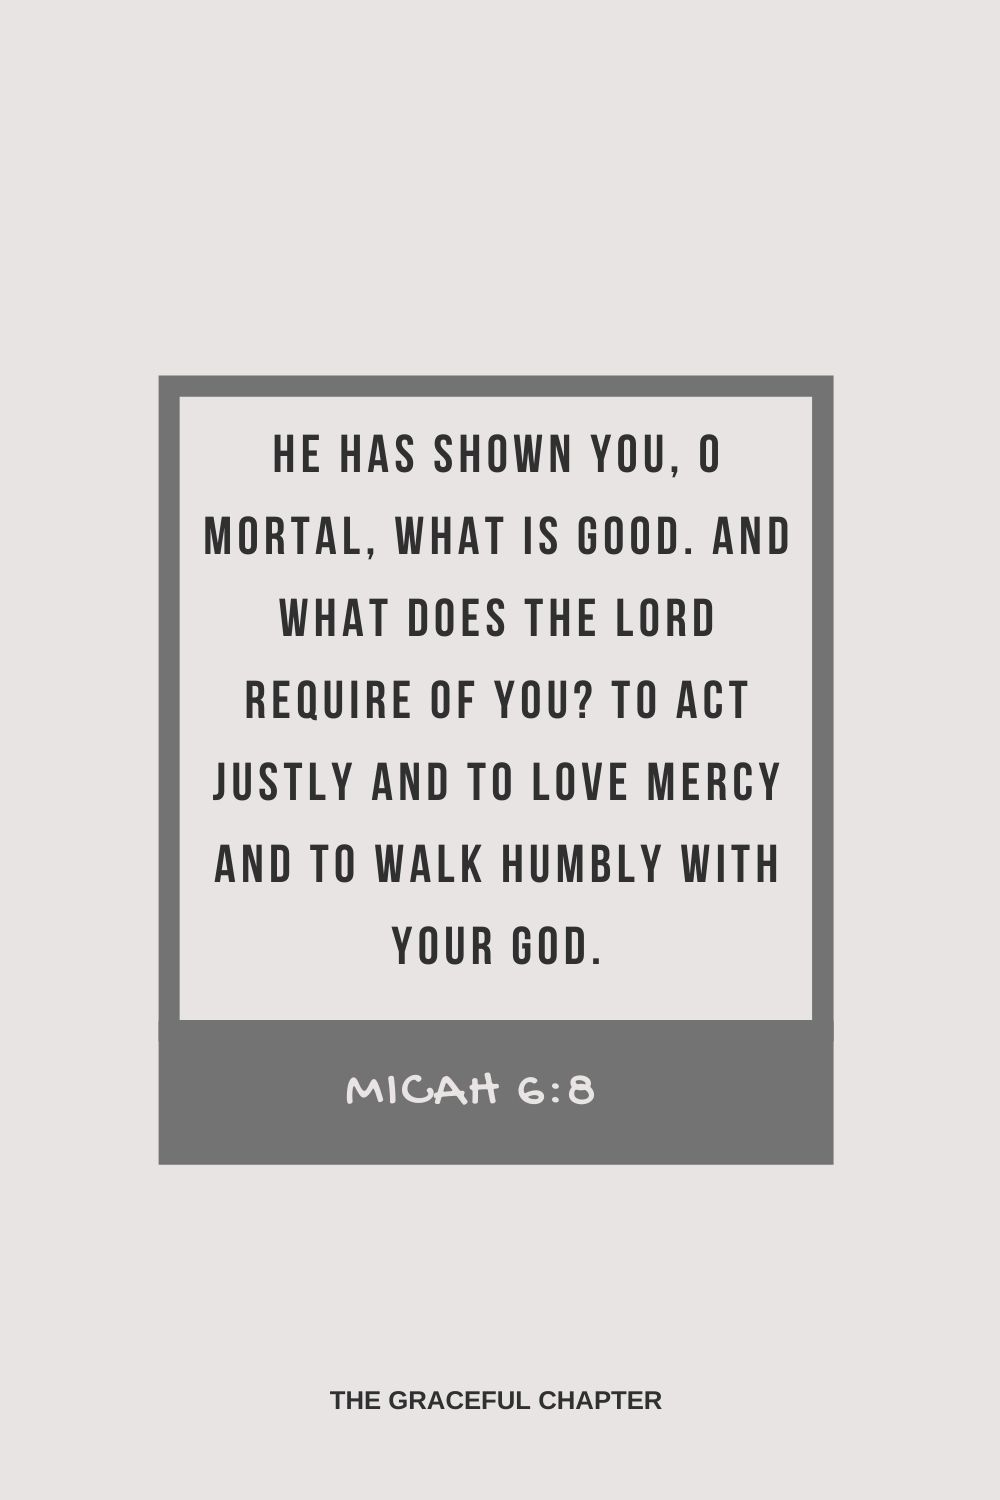 He has shown you, O mortal, what is good. And what does the Lord require of you? To act justly and to love mercy and to walk humbly with your God. Micah 6:8